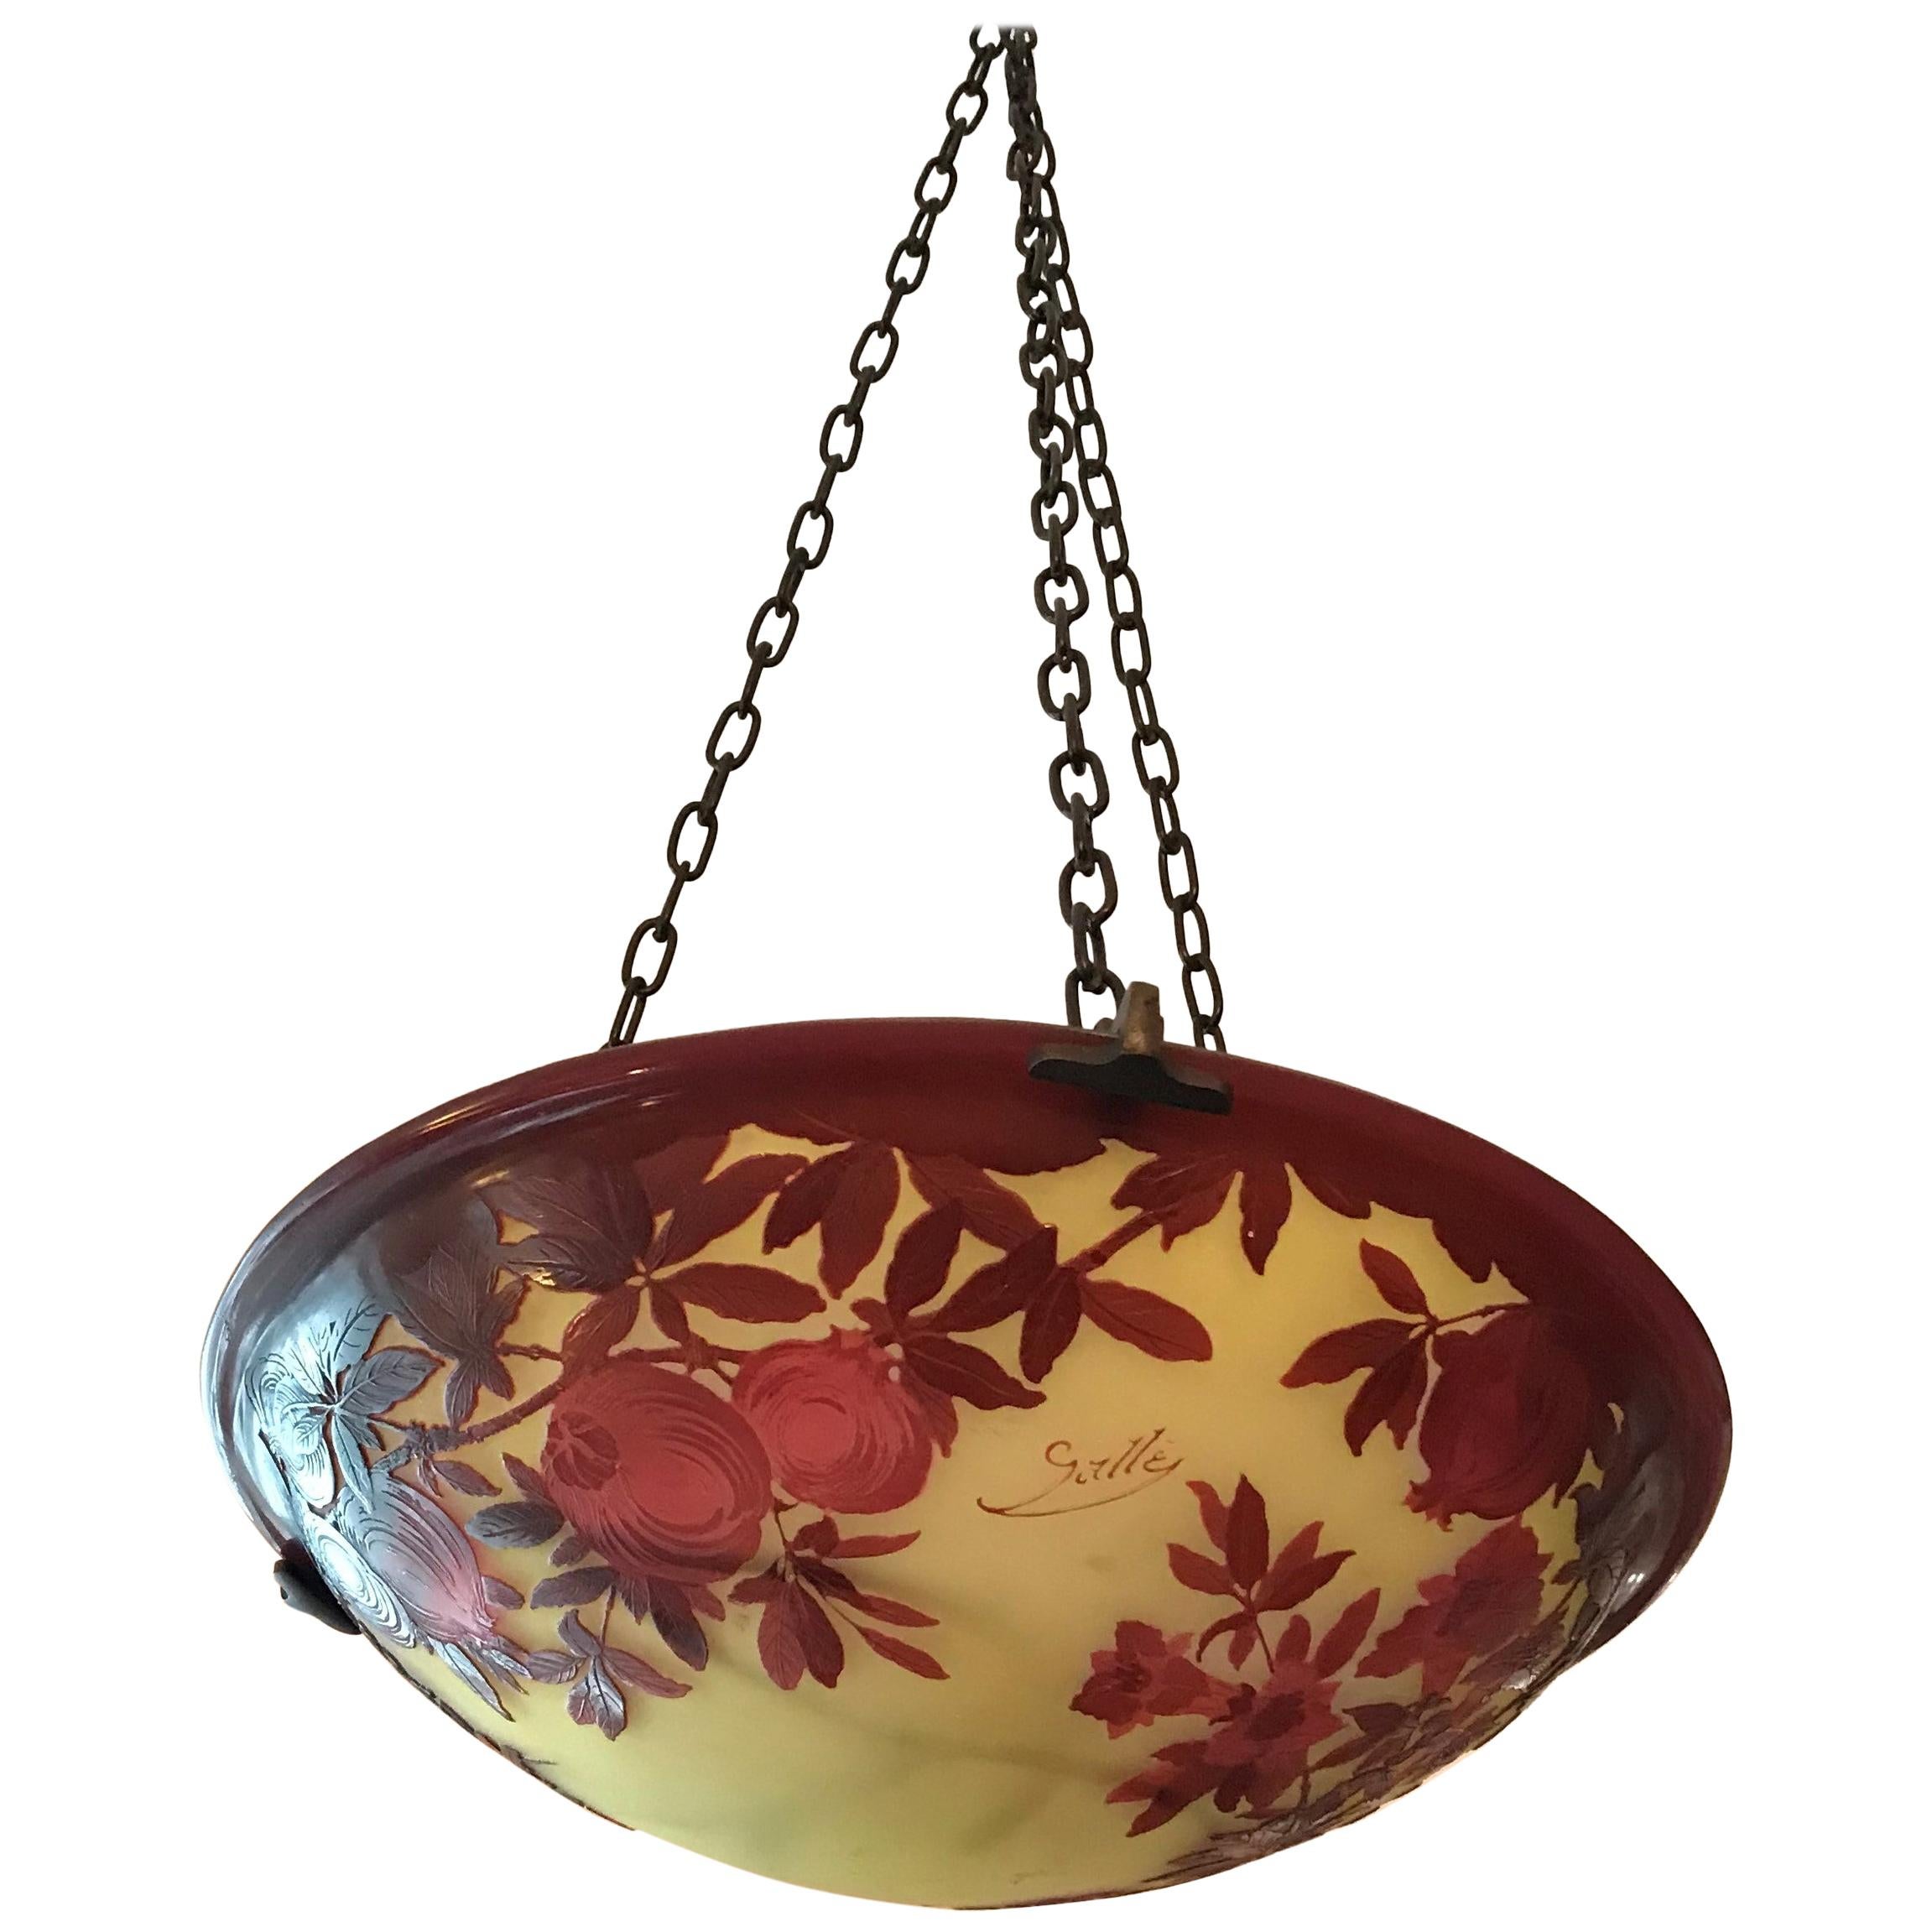 Galle French Cameo Glass Hanging Light Fixture Pomegranate Pattern For Sale